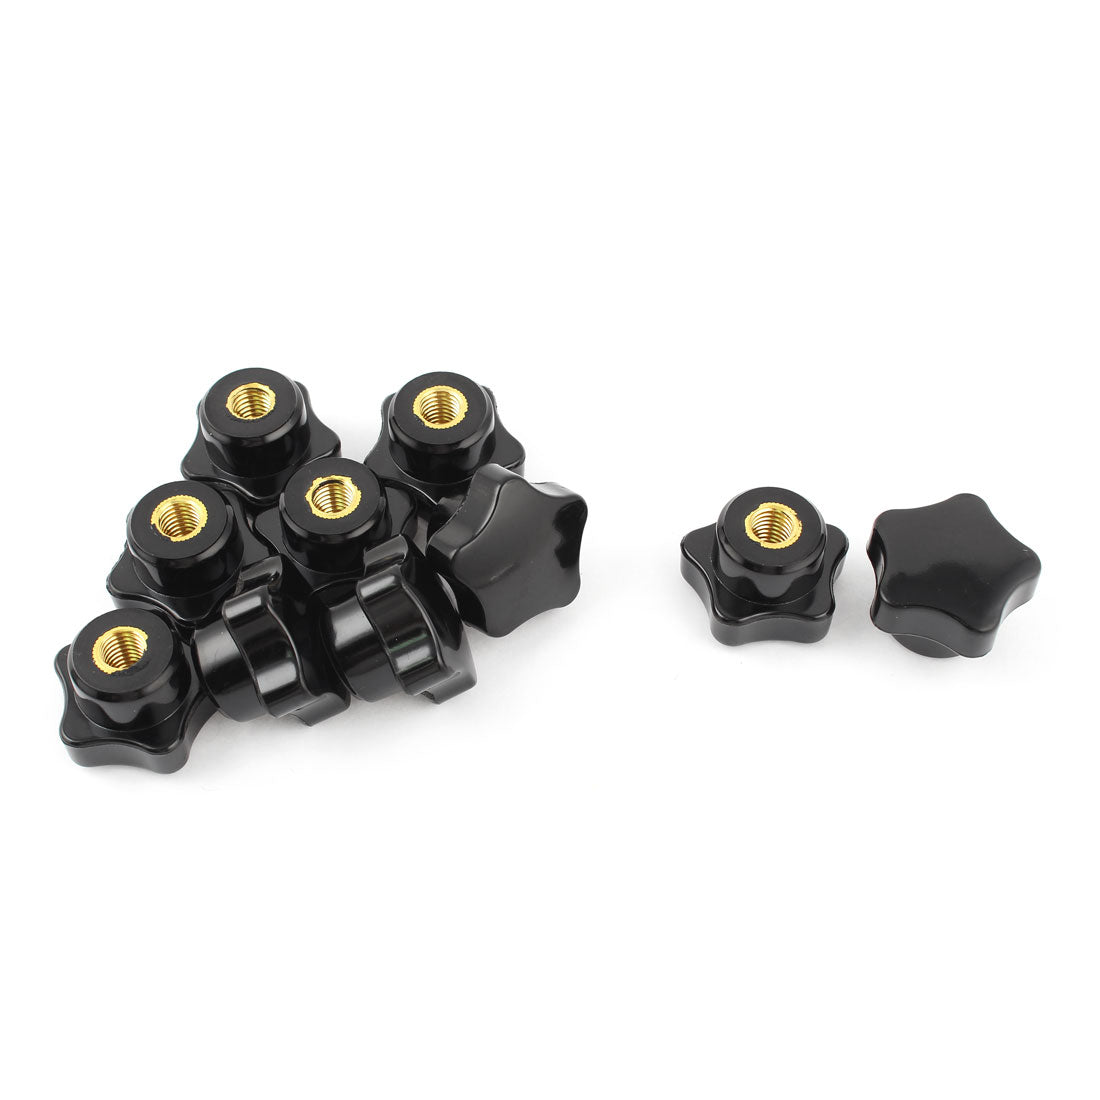 Uxcell Uxcell 10pcs M8 Female Thread 30mm Star Shaped Head Clamping Nuts Knob Grip Handle